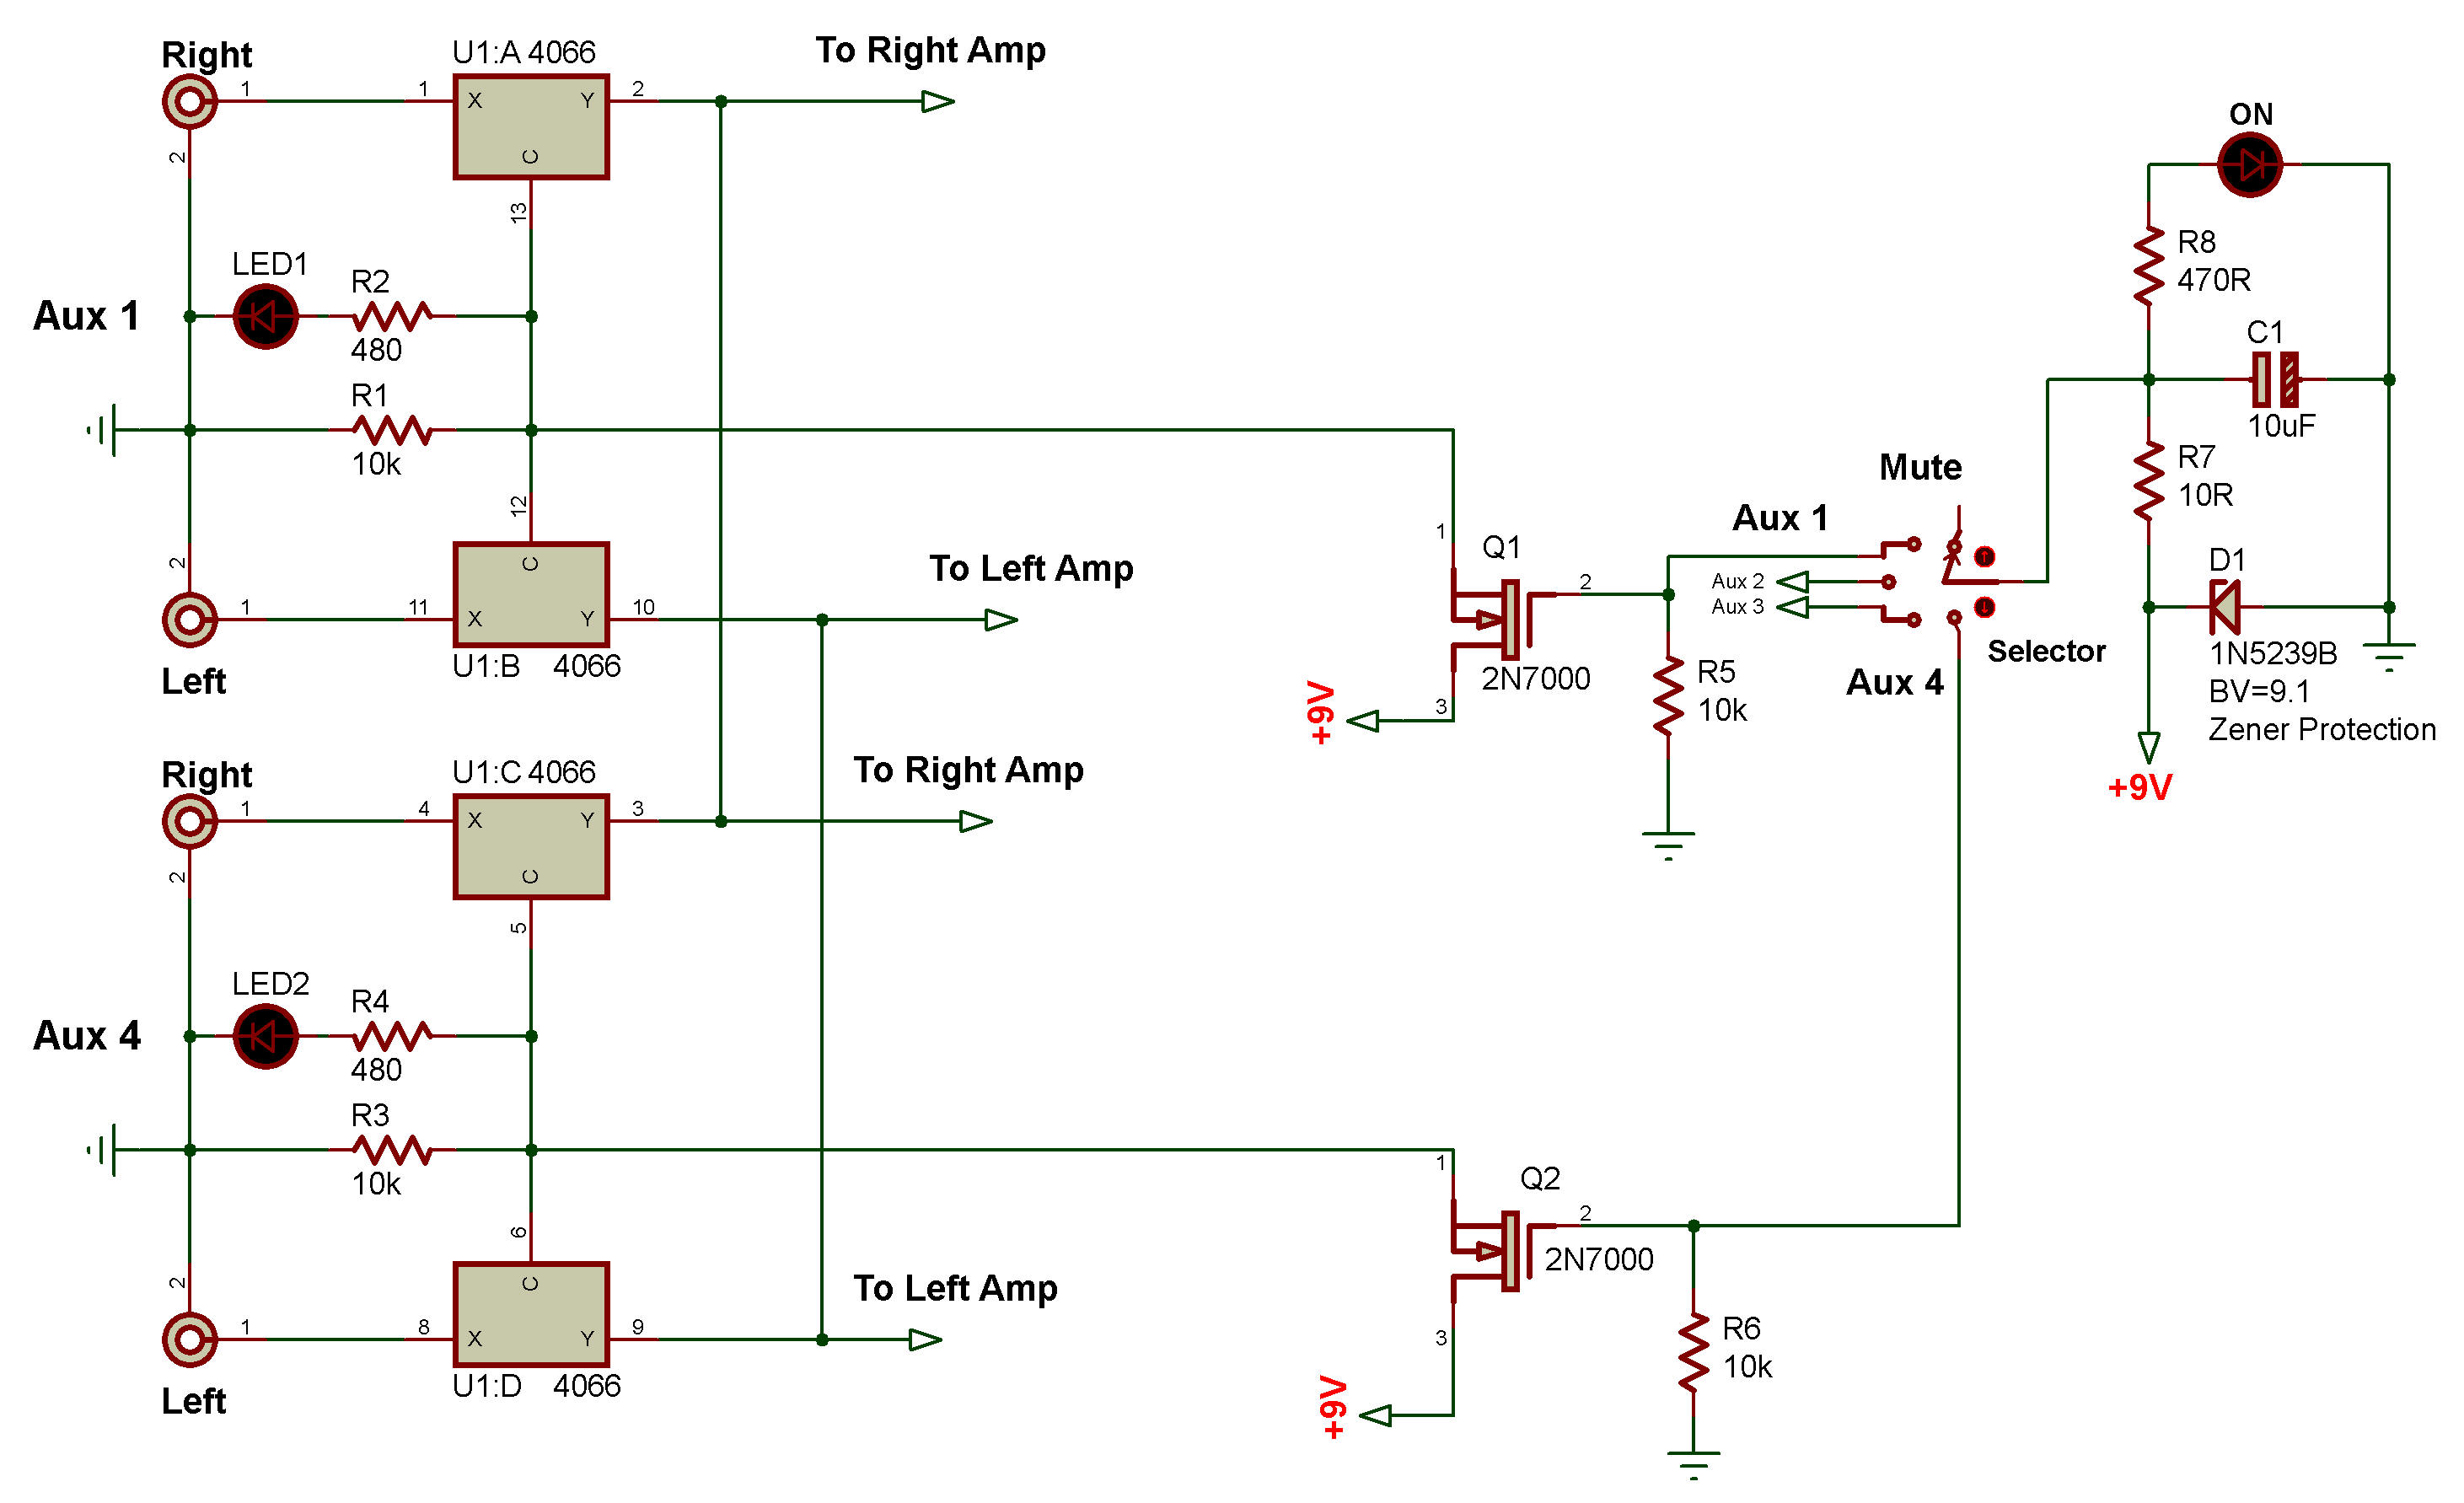 Auxiliary selector Using MOSFETs